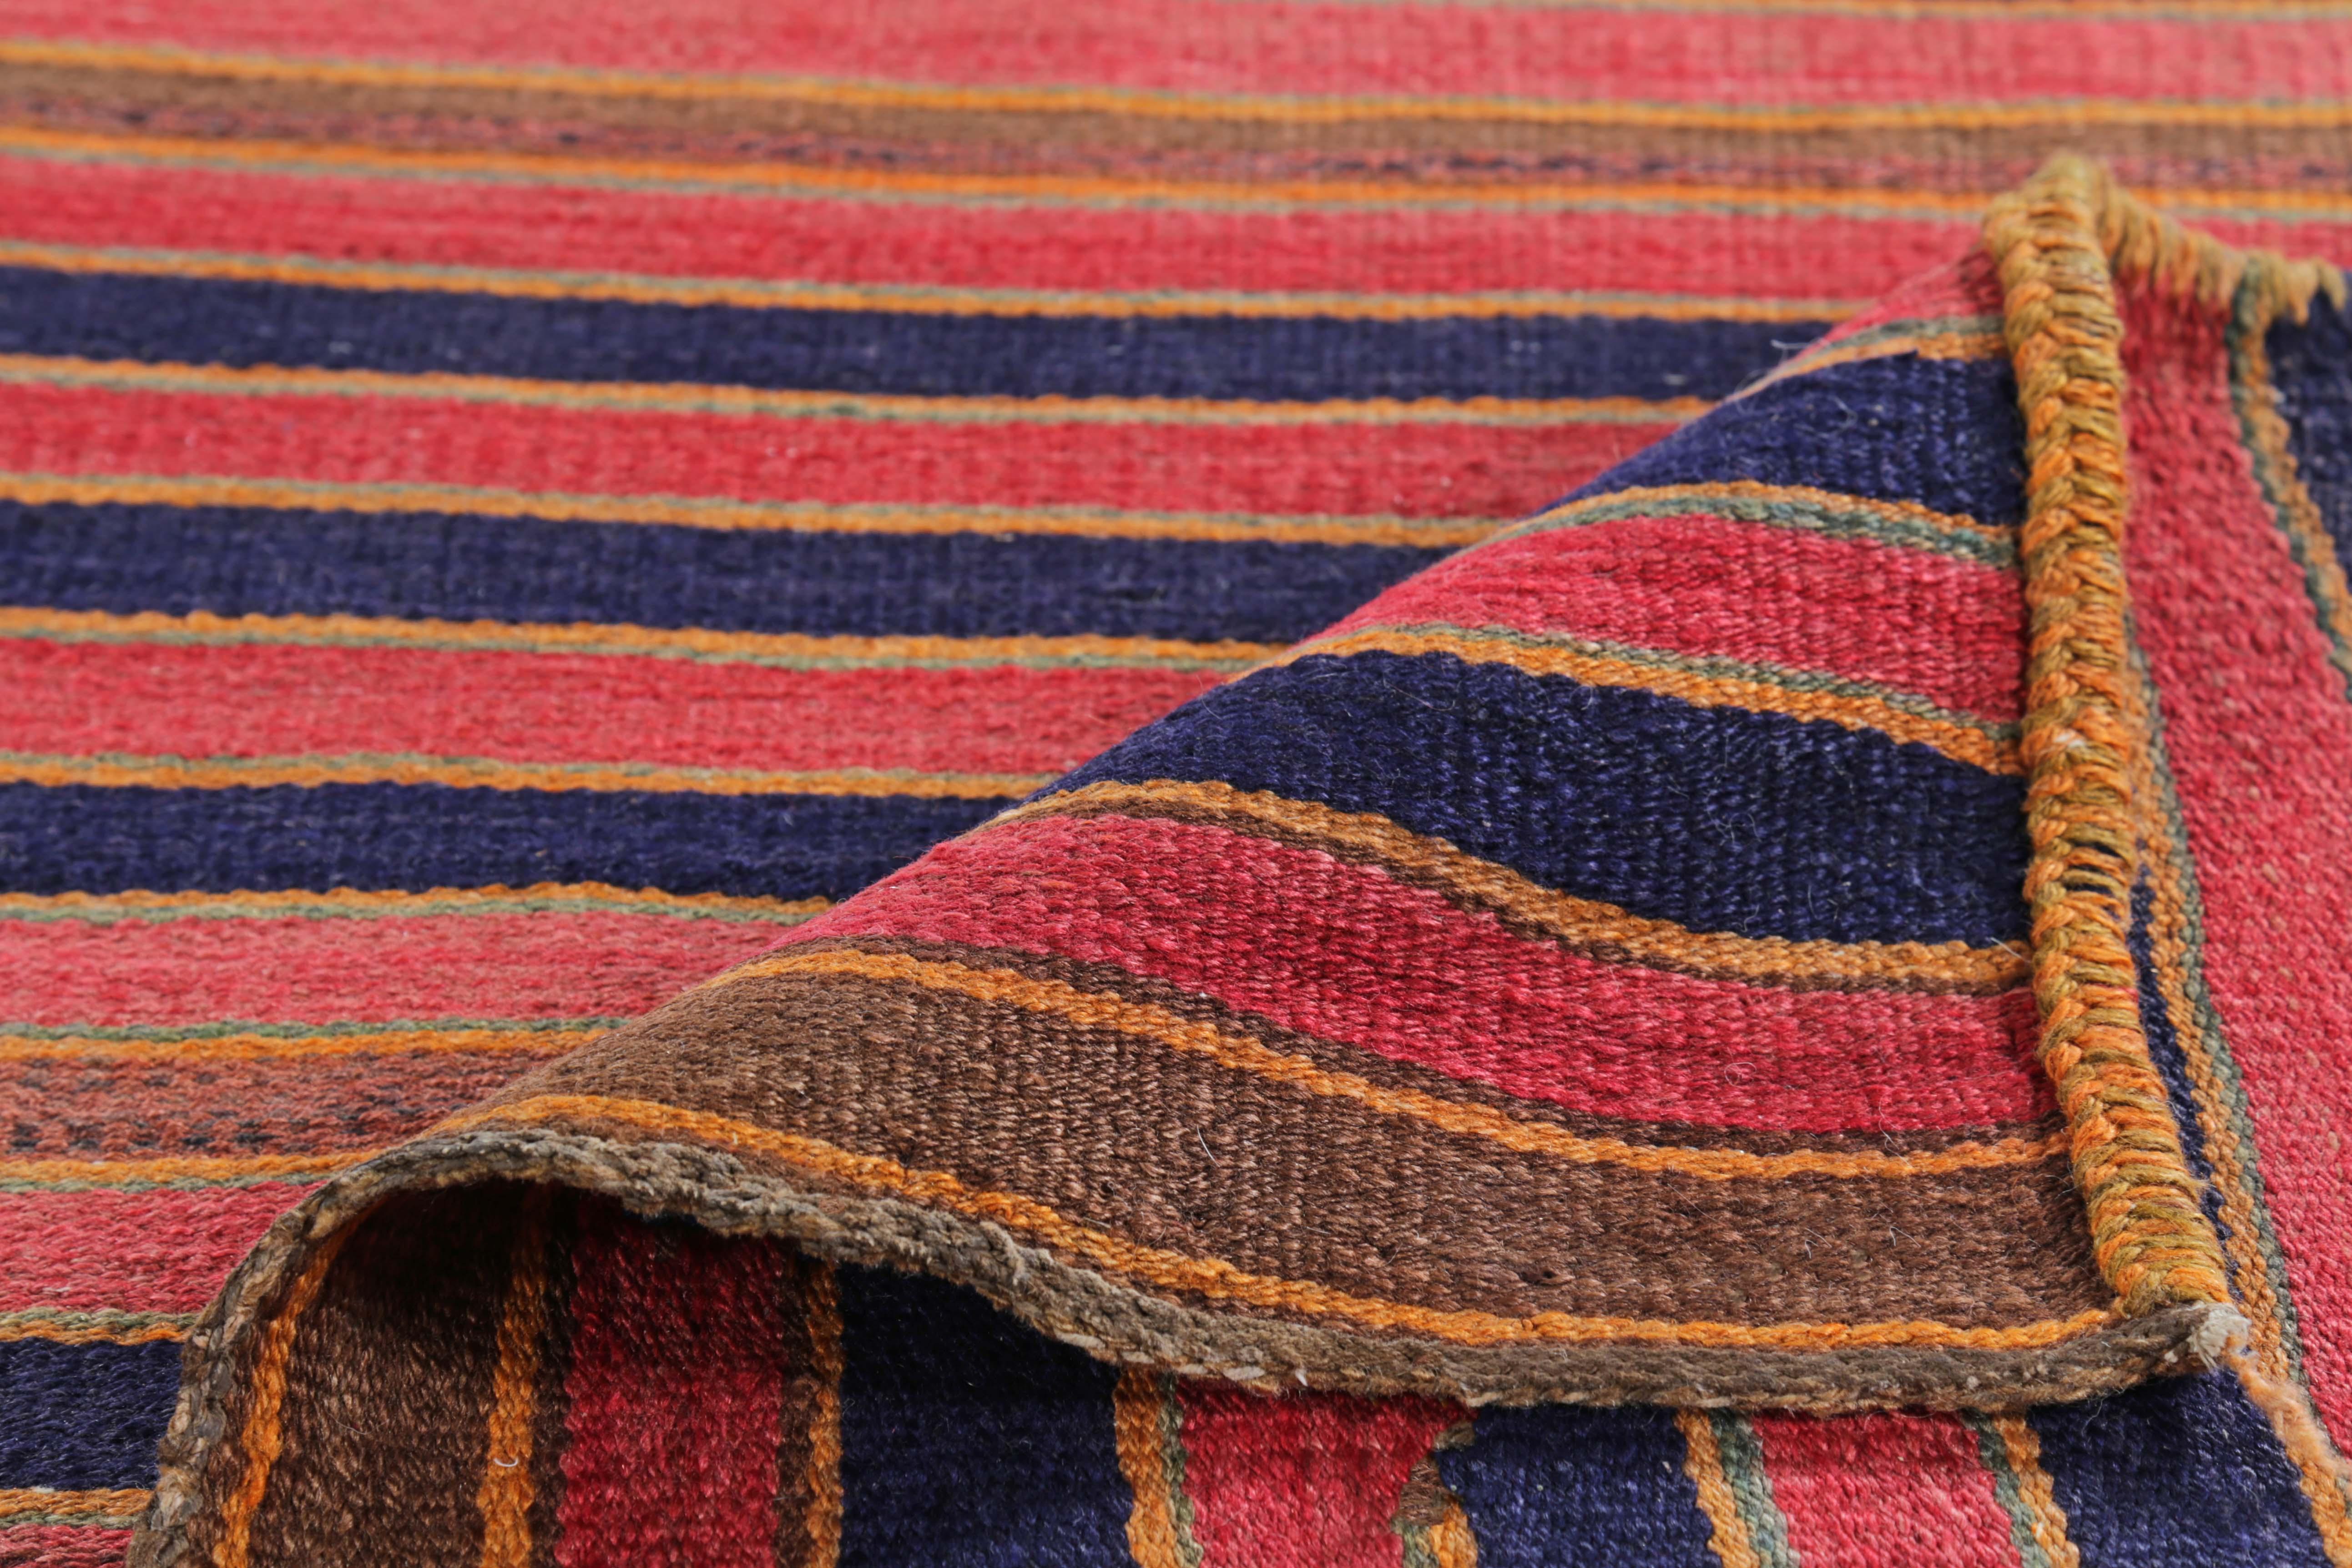 Contemporary Modern Turkish Kilim Runner Rug with Red and Blue Stripes on a Brown Field For Sale